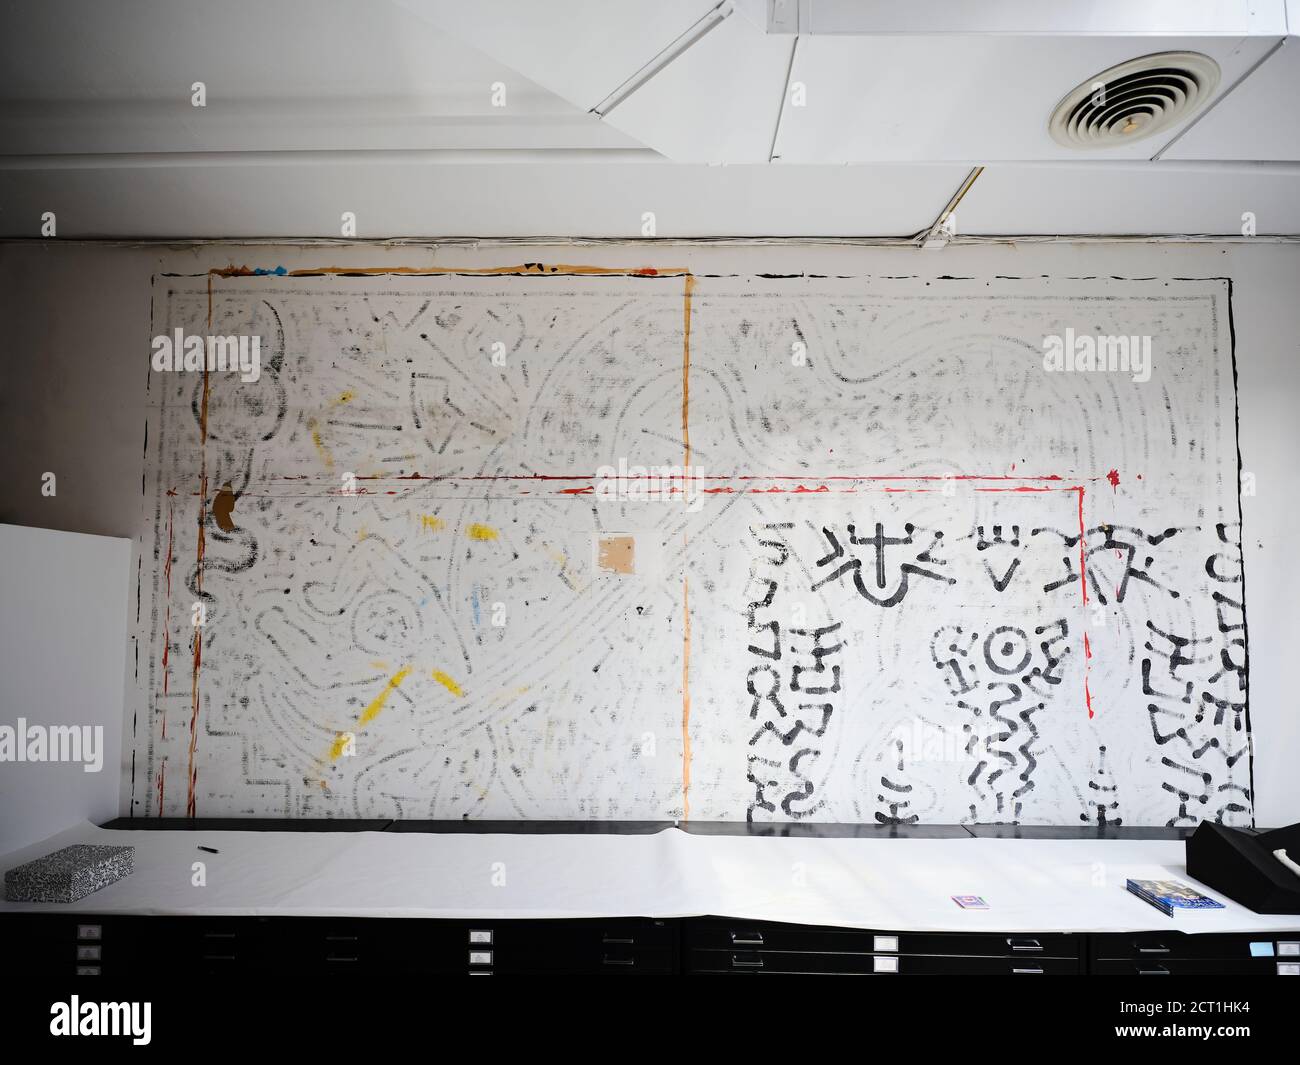 Keith Haring Studio Banque D'Images